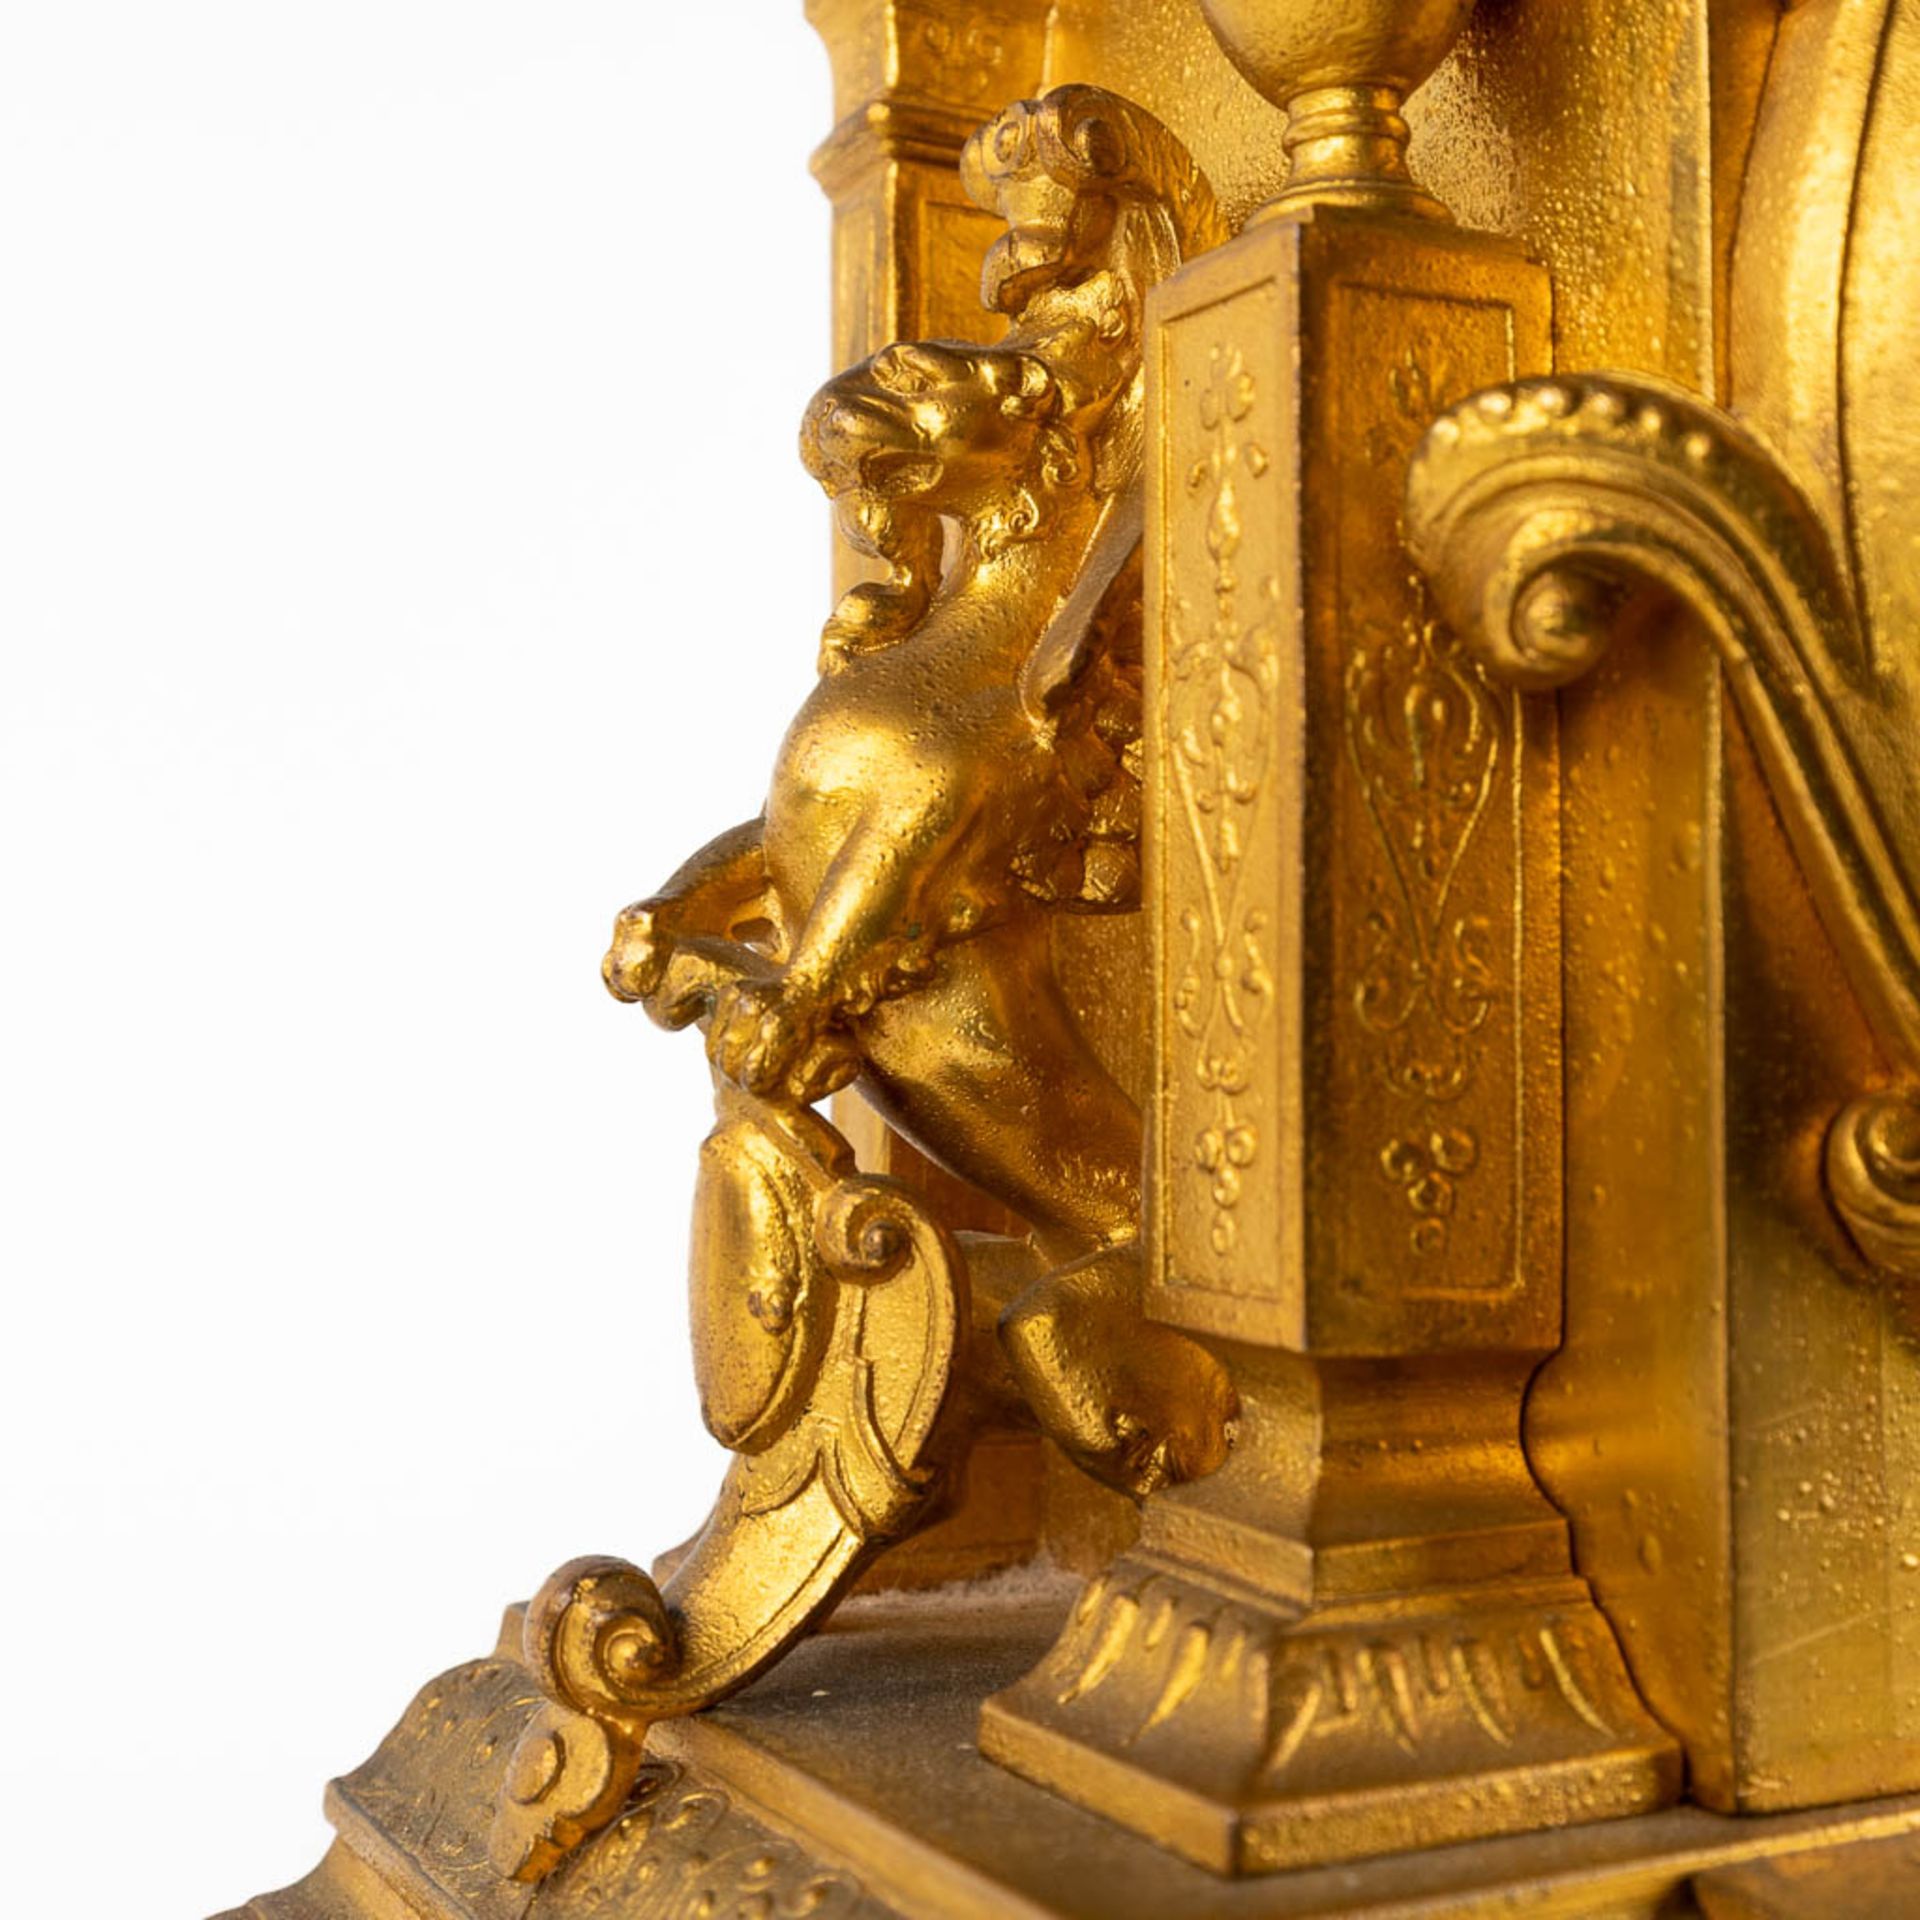 A mantle clock, Neoclassical style, gilt spelter. 19th C. (D:13 x W:27 x H:40 cm) - Image 11 of 13